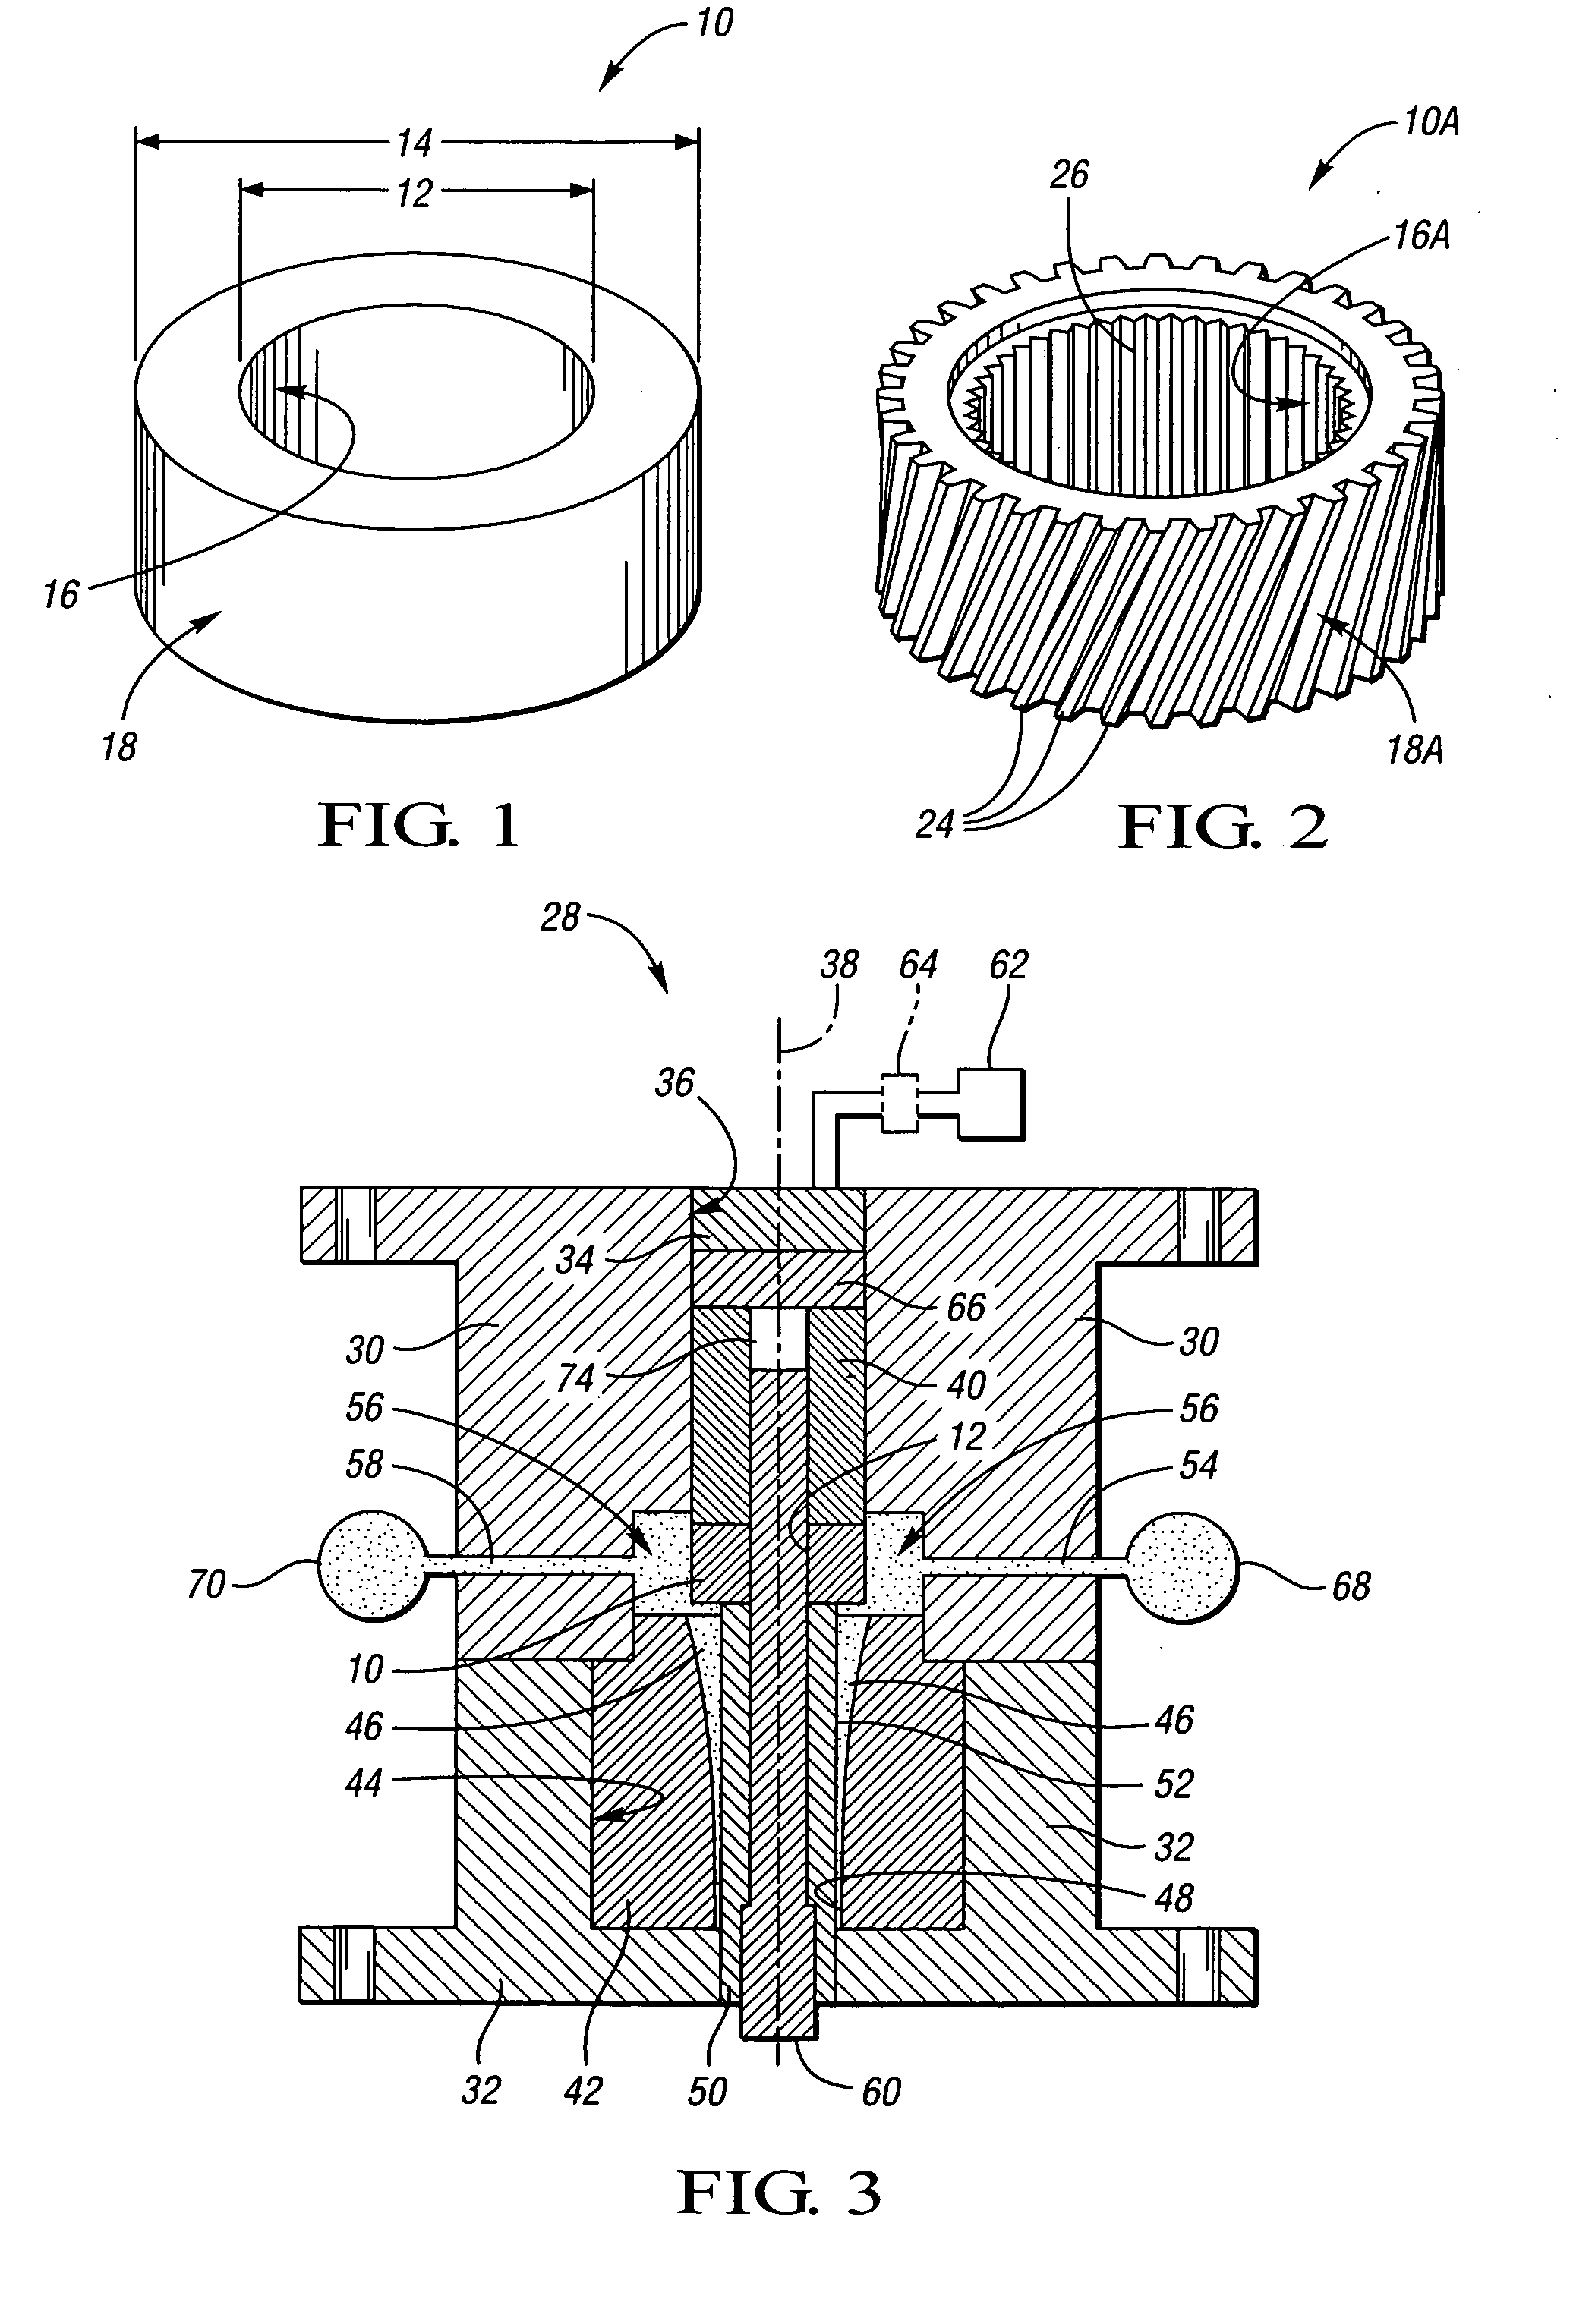 Method of net-forming an article and apparatus for same